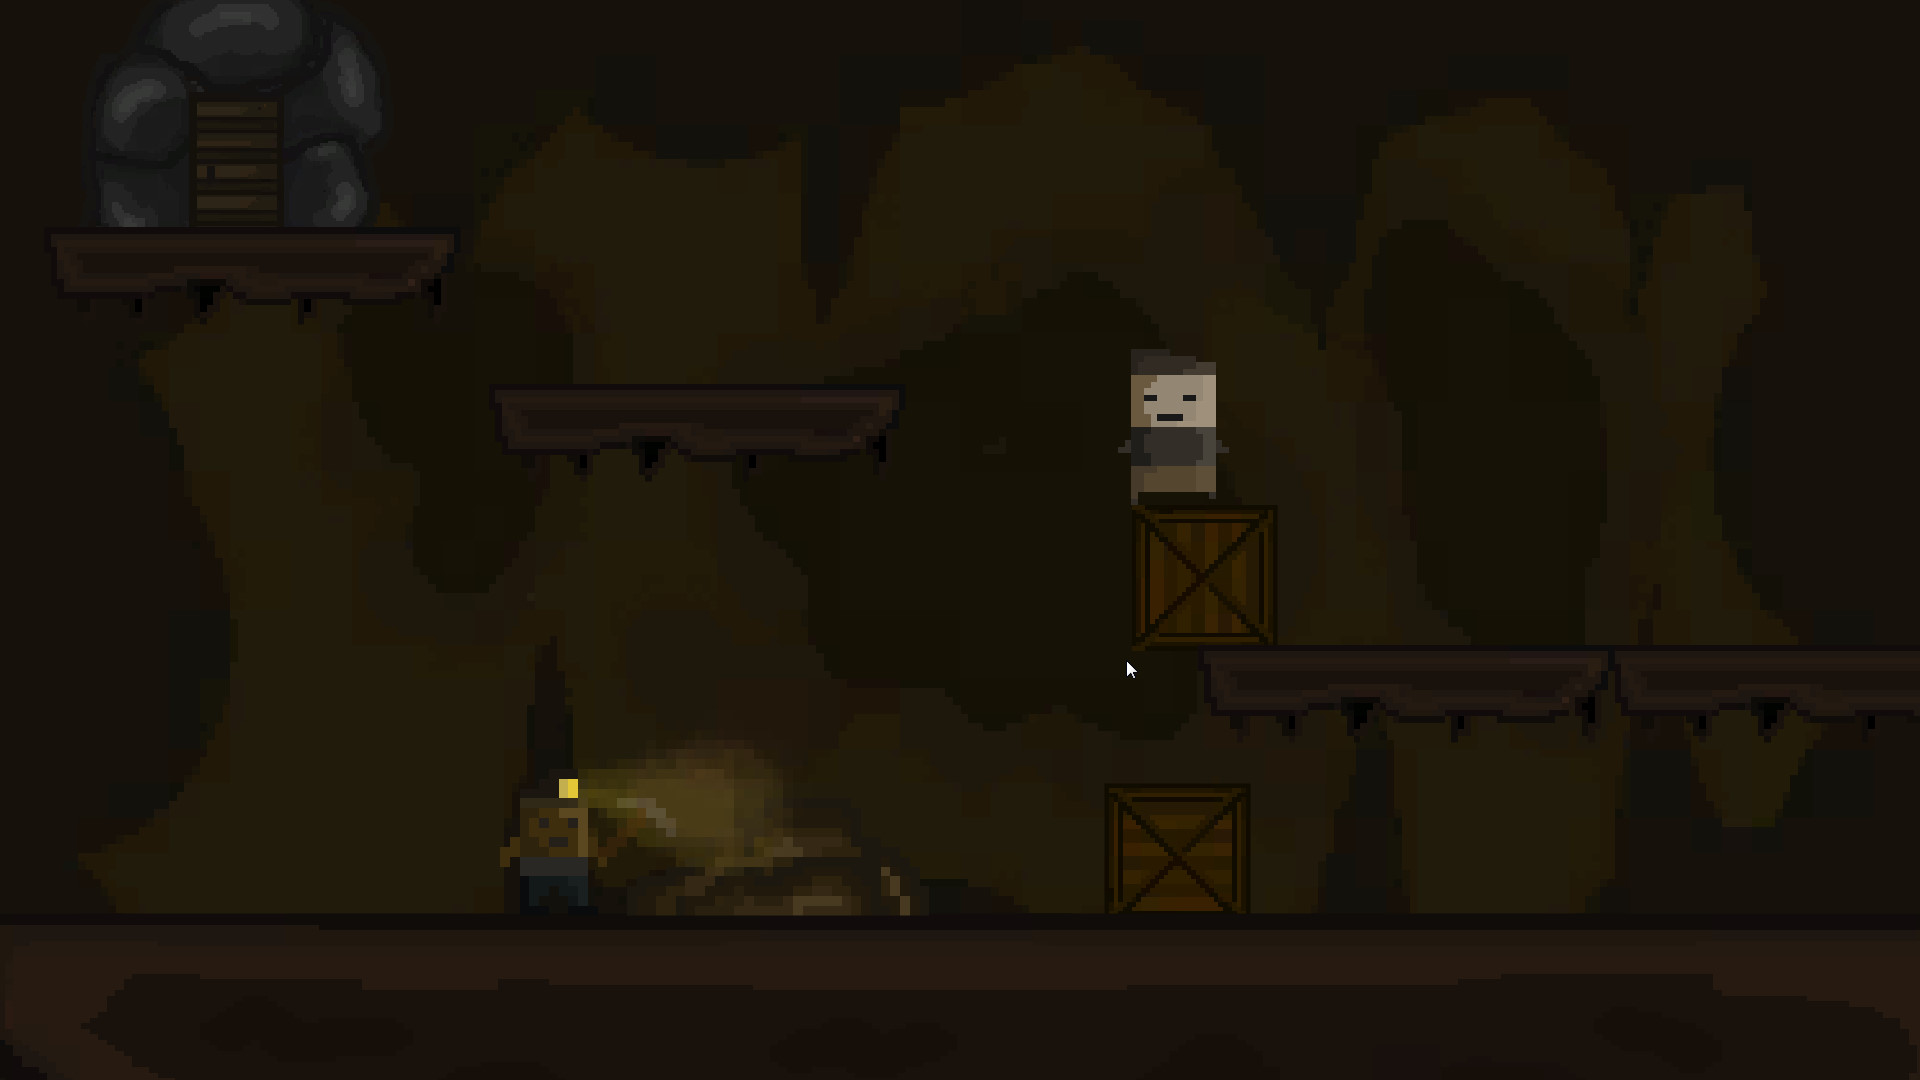 The soldier in the mine screenshot